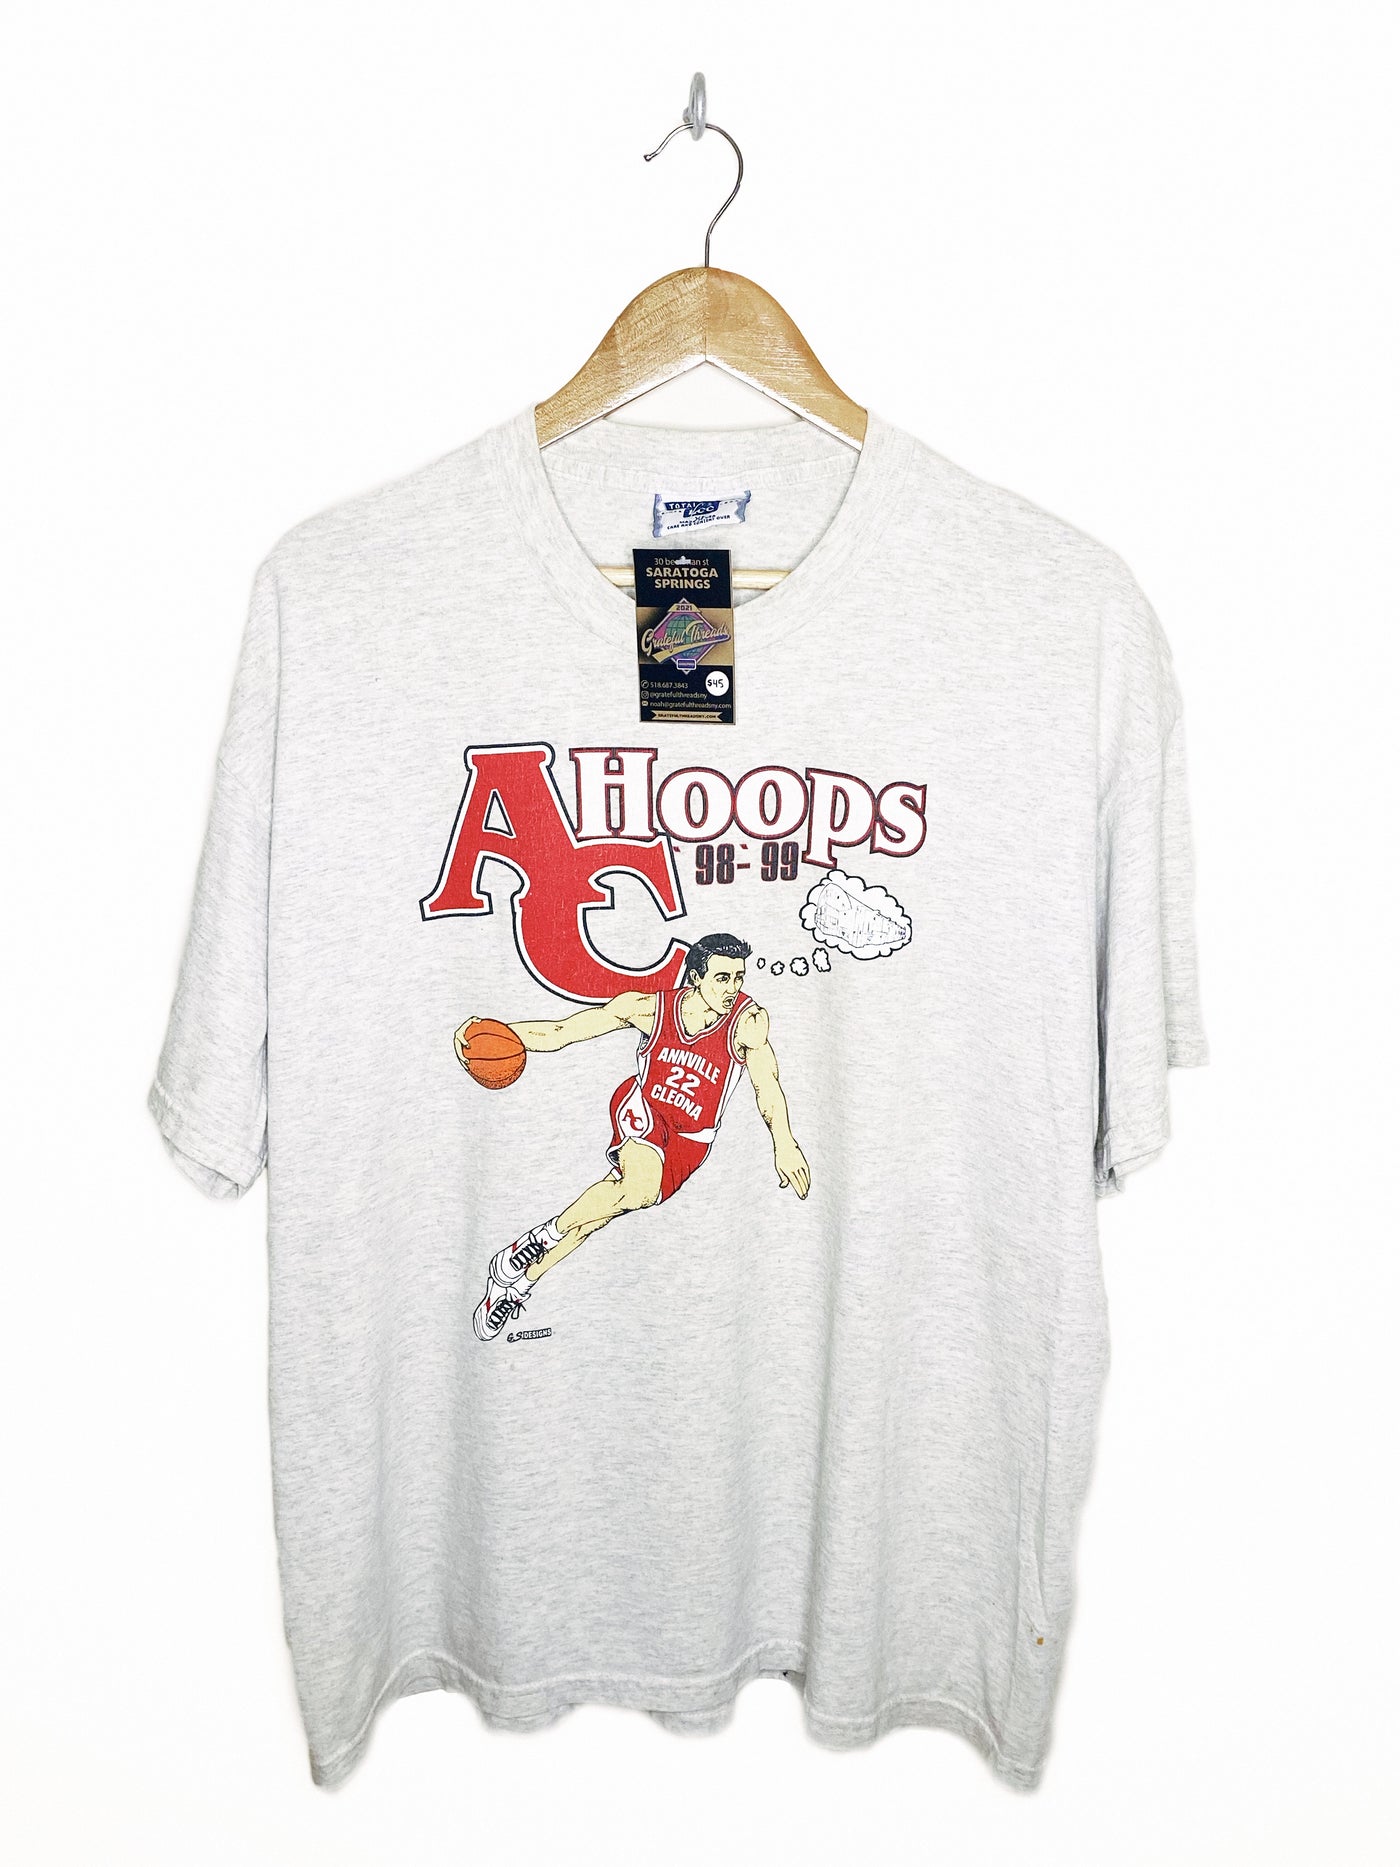 Vintage 1998 Annville Cleona Hoops T-Shirt